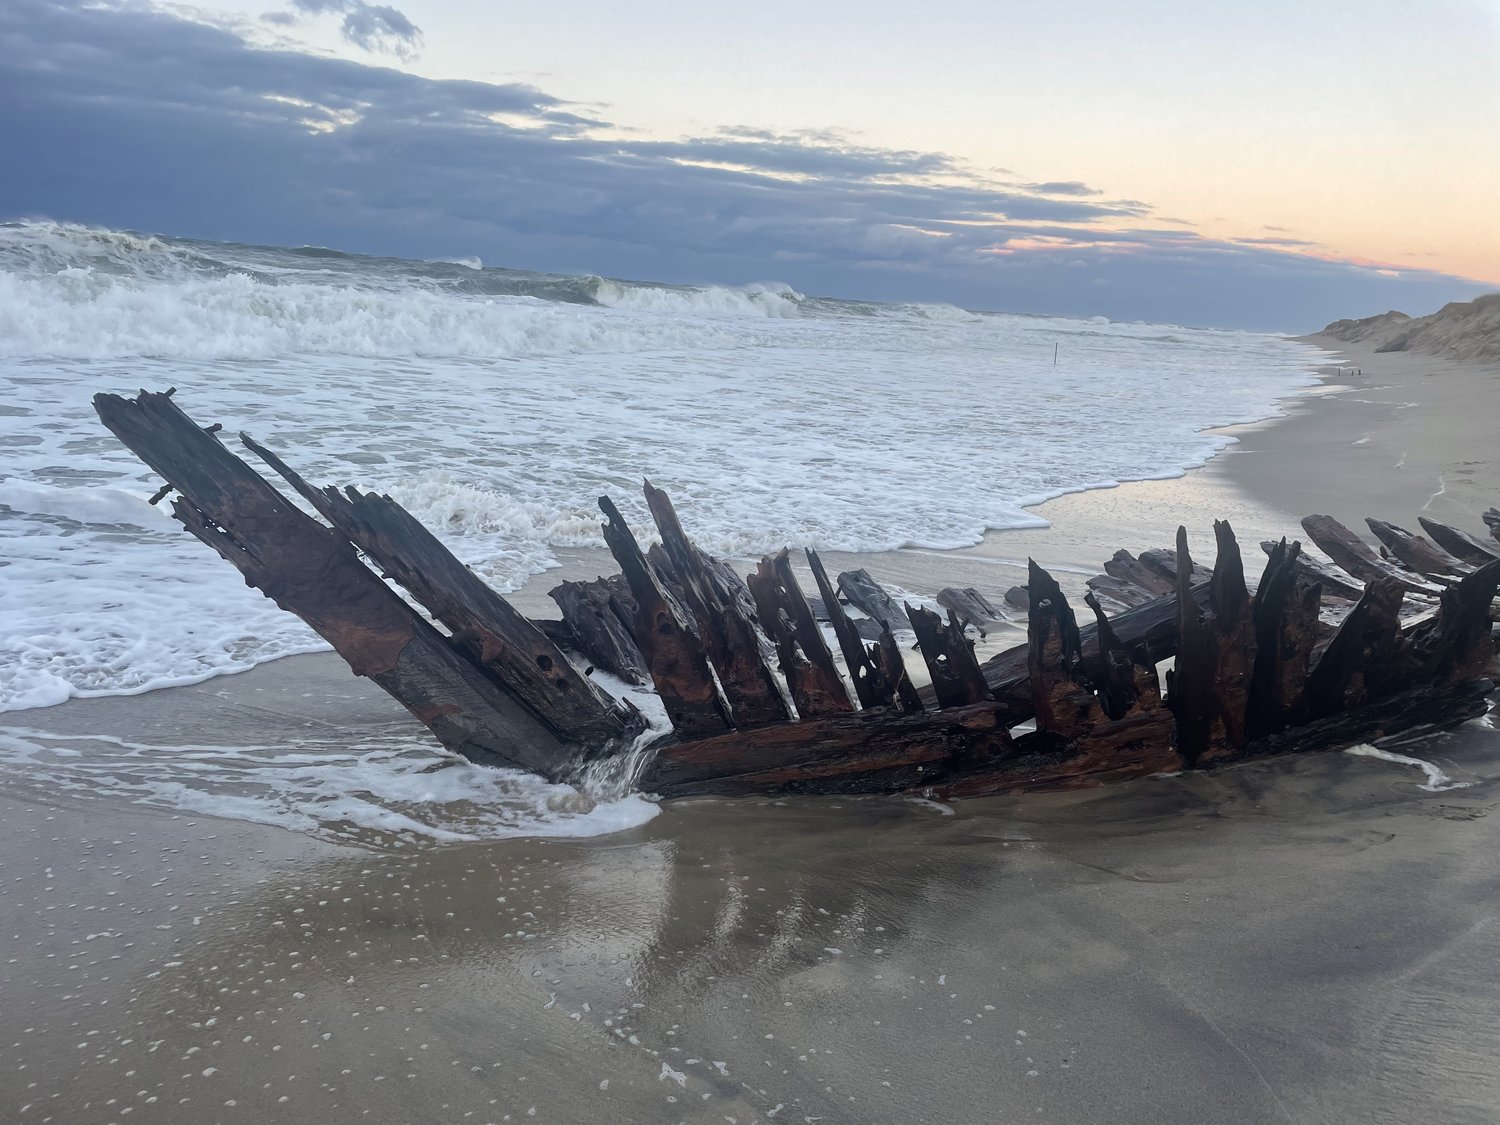 The ribs of a vessel uncovered on the south shore after a winter storm may be the remains of the cargo schooner Warren Sawyer, out of New Orleans and bound for Boston with a cargo of cotton in 1884.